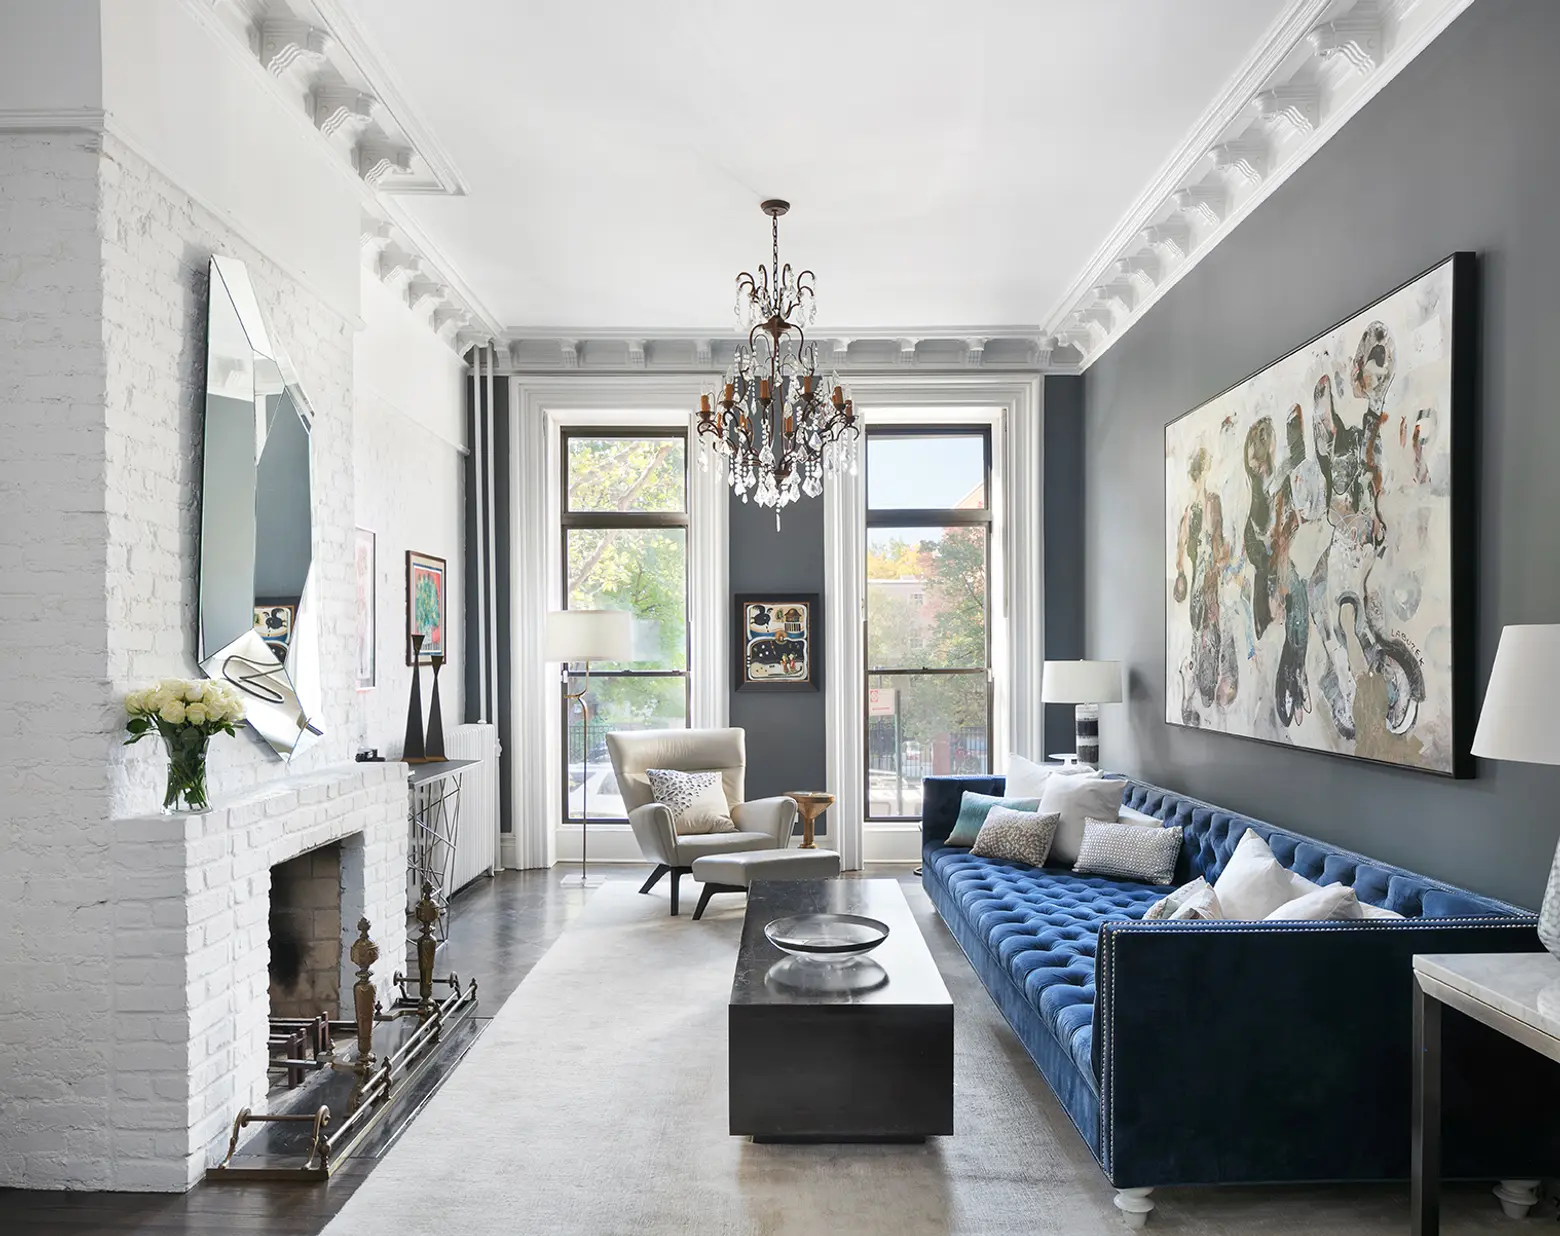 This classic Boerum Hill Italianate brownstone checks all of the boxes for $5M